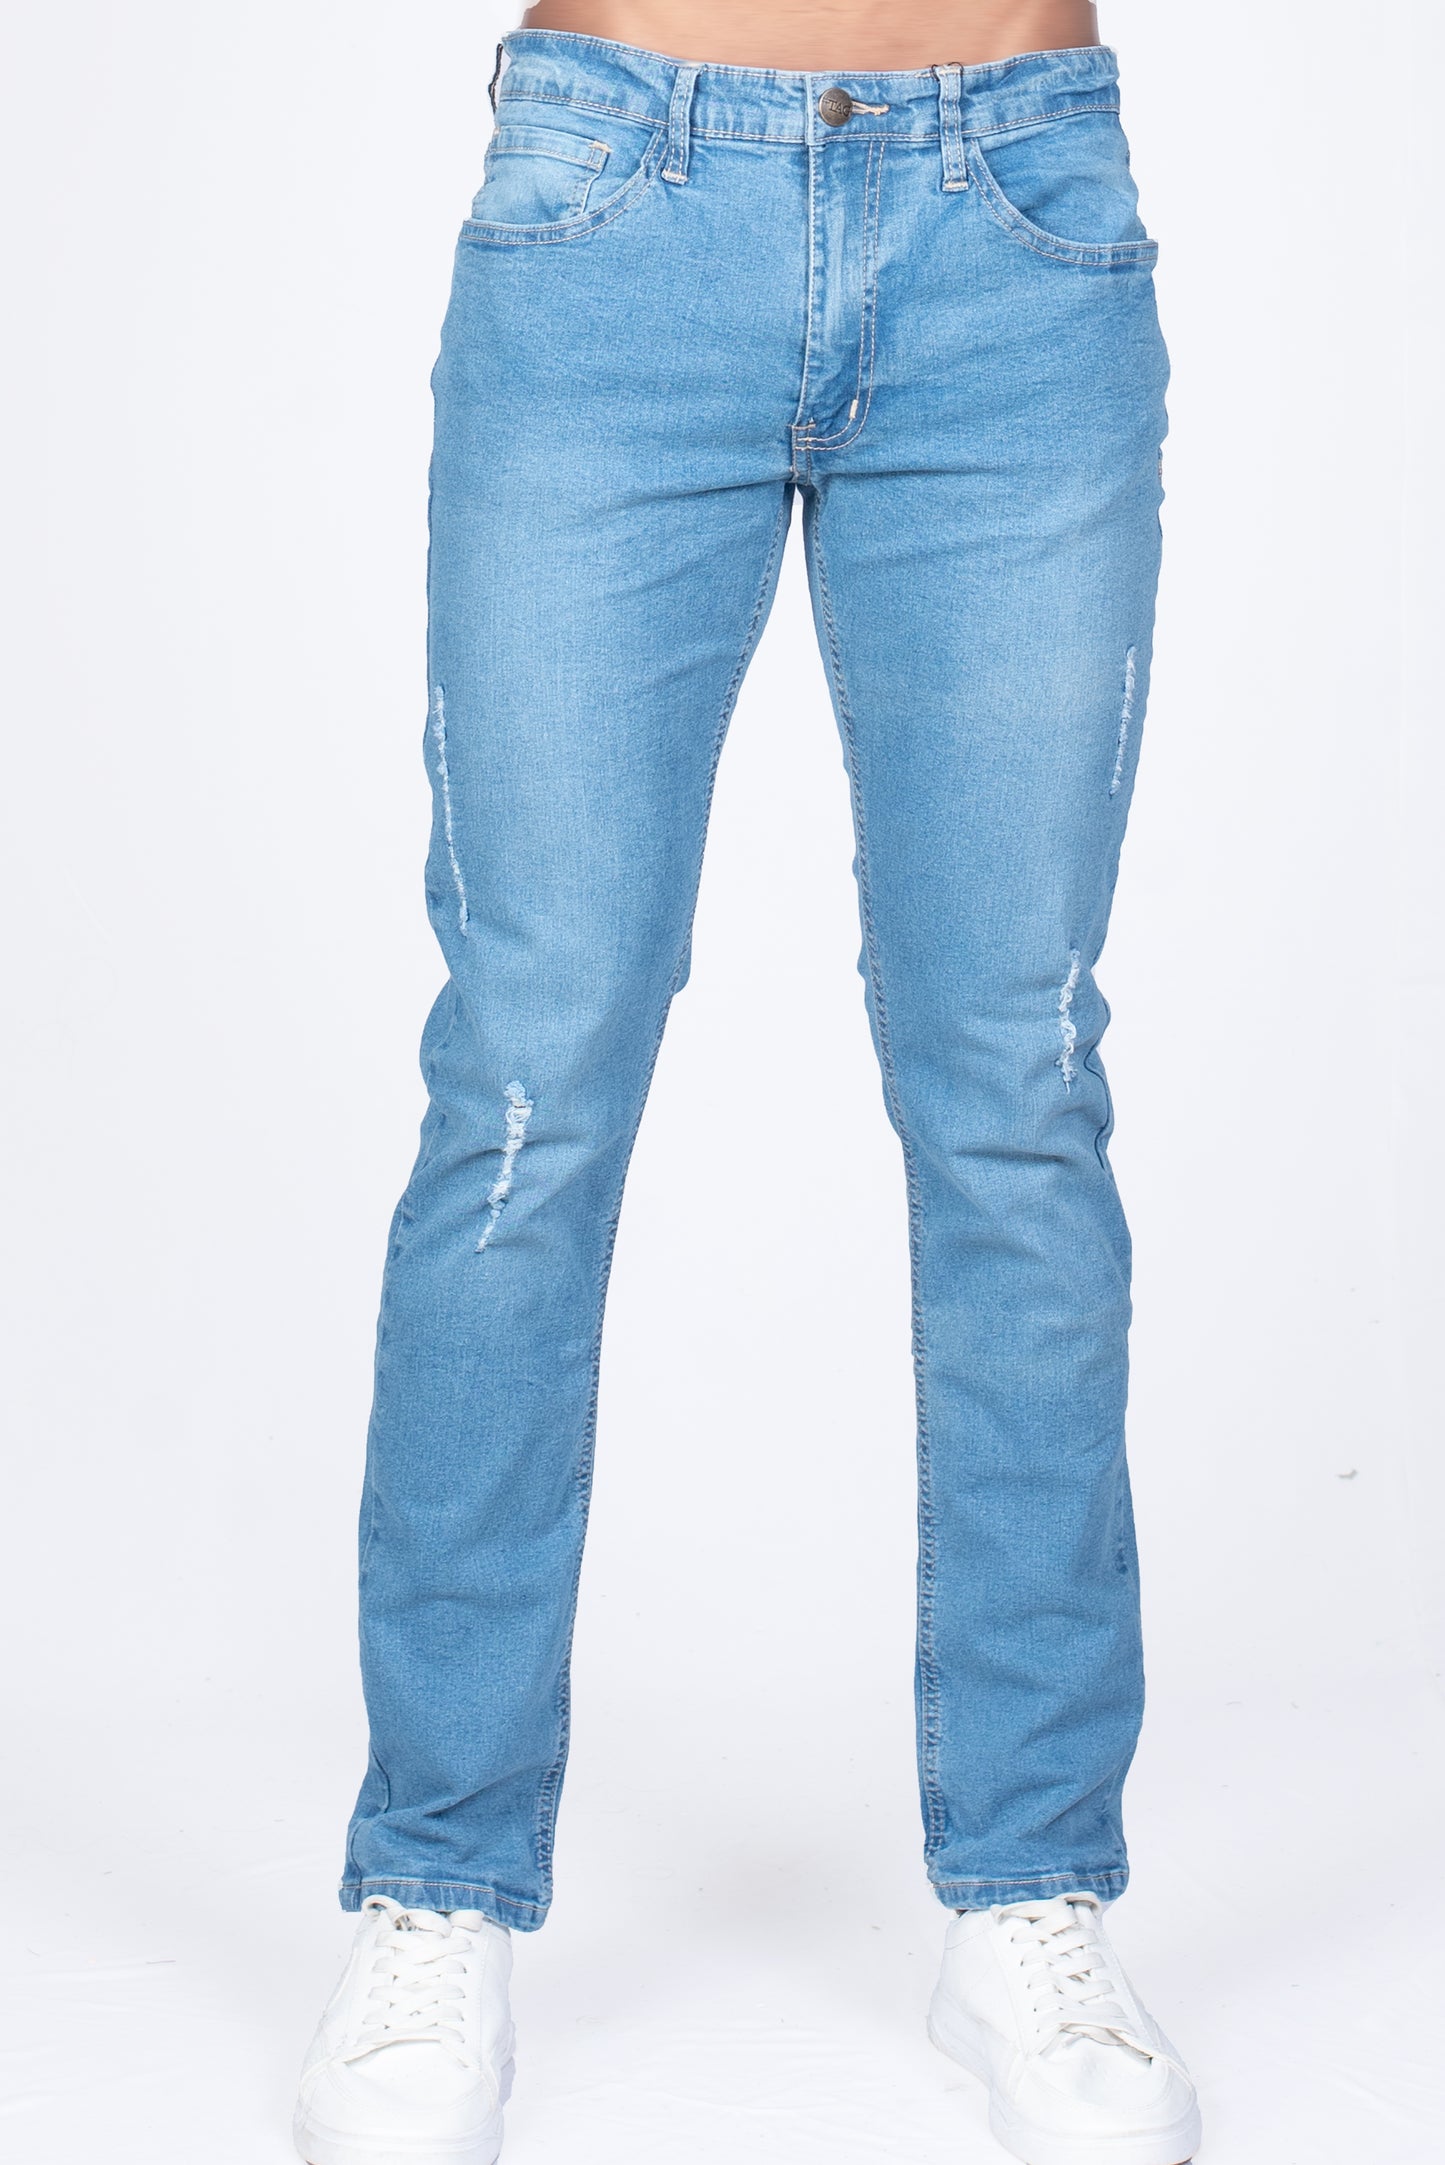 Men's Tooled Detailed Slim Fit Jeans in Ice Blue Wash